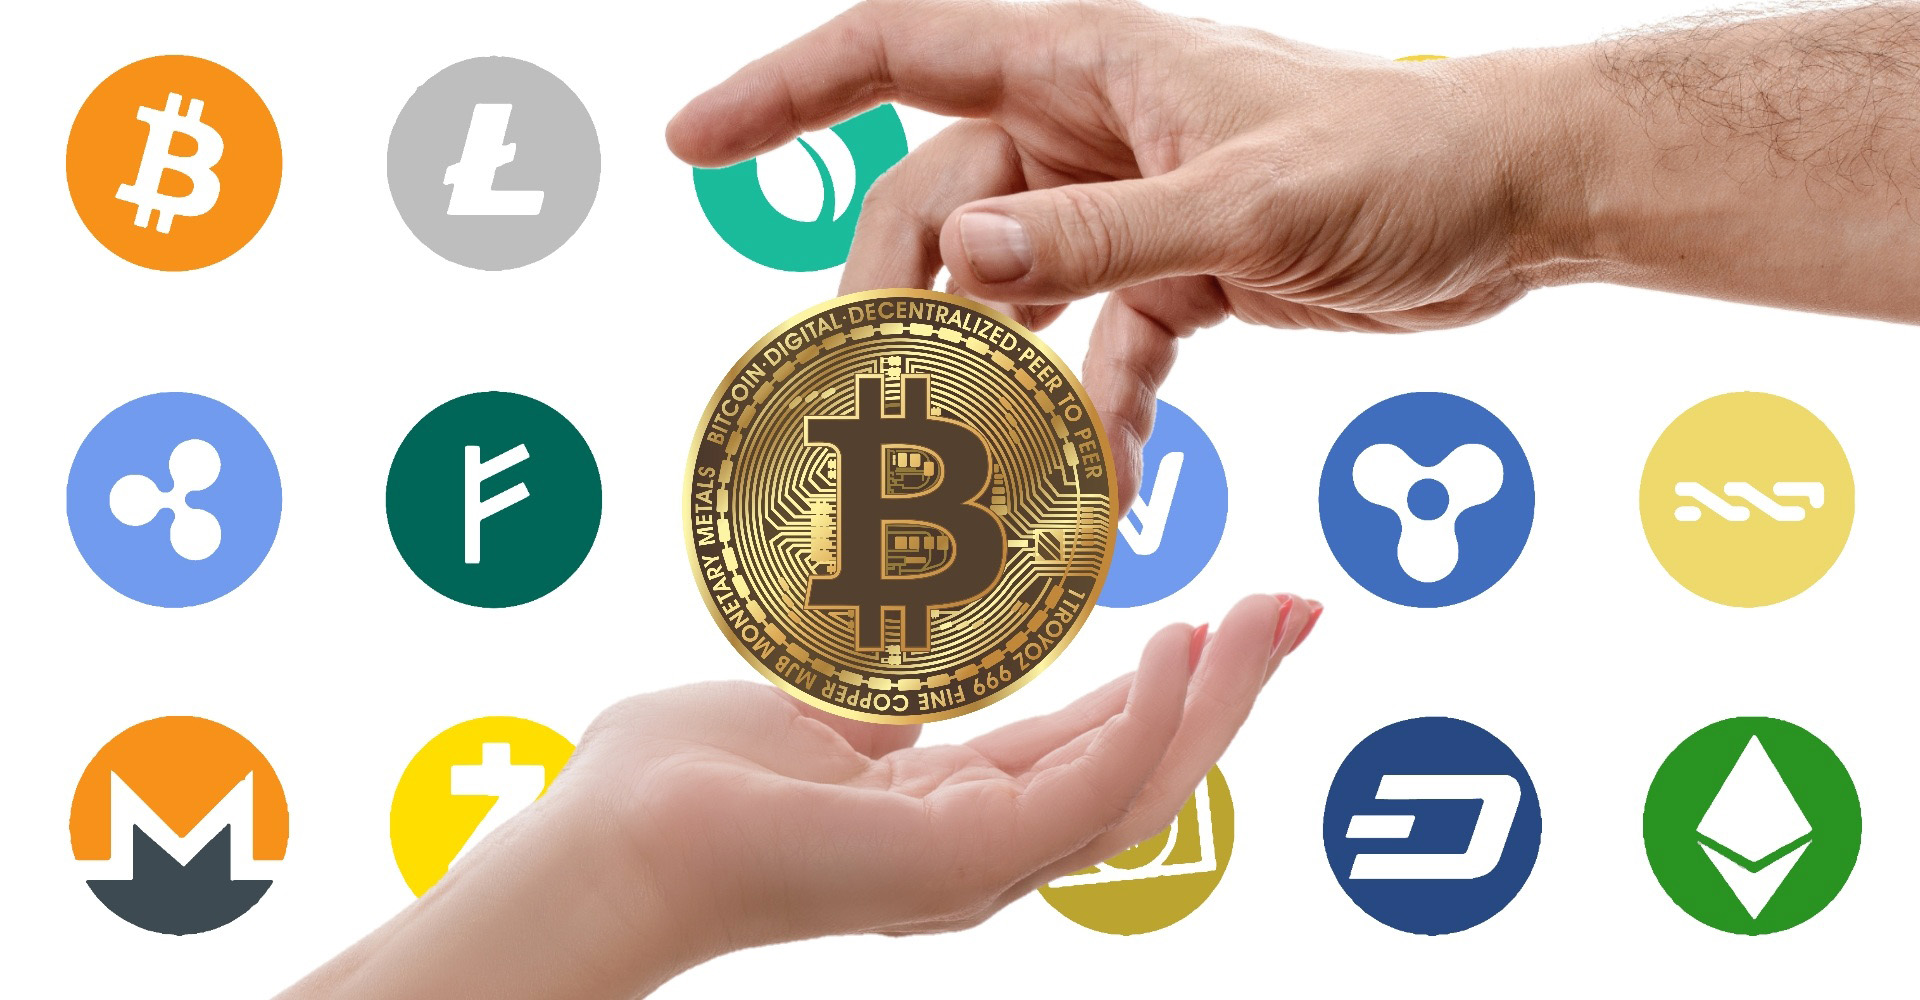 Bitcoin and other cryptocurrency exchange image - Free ...